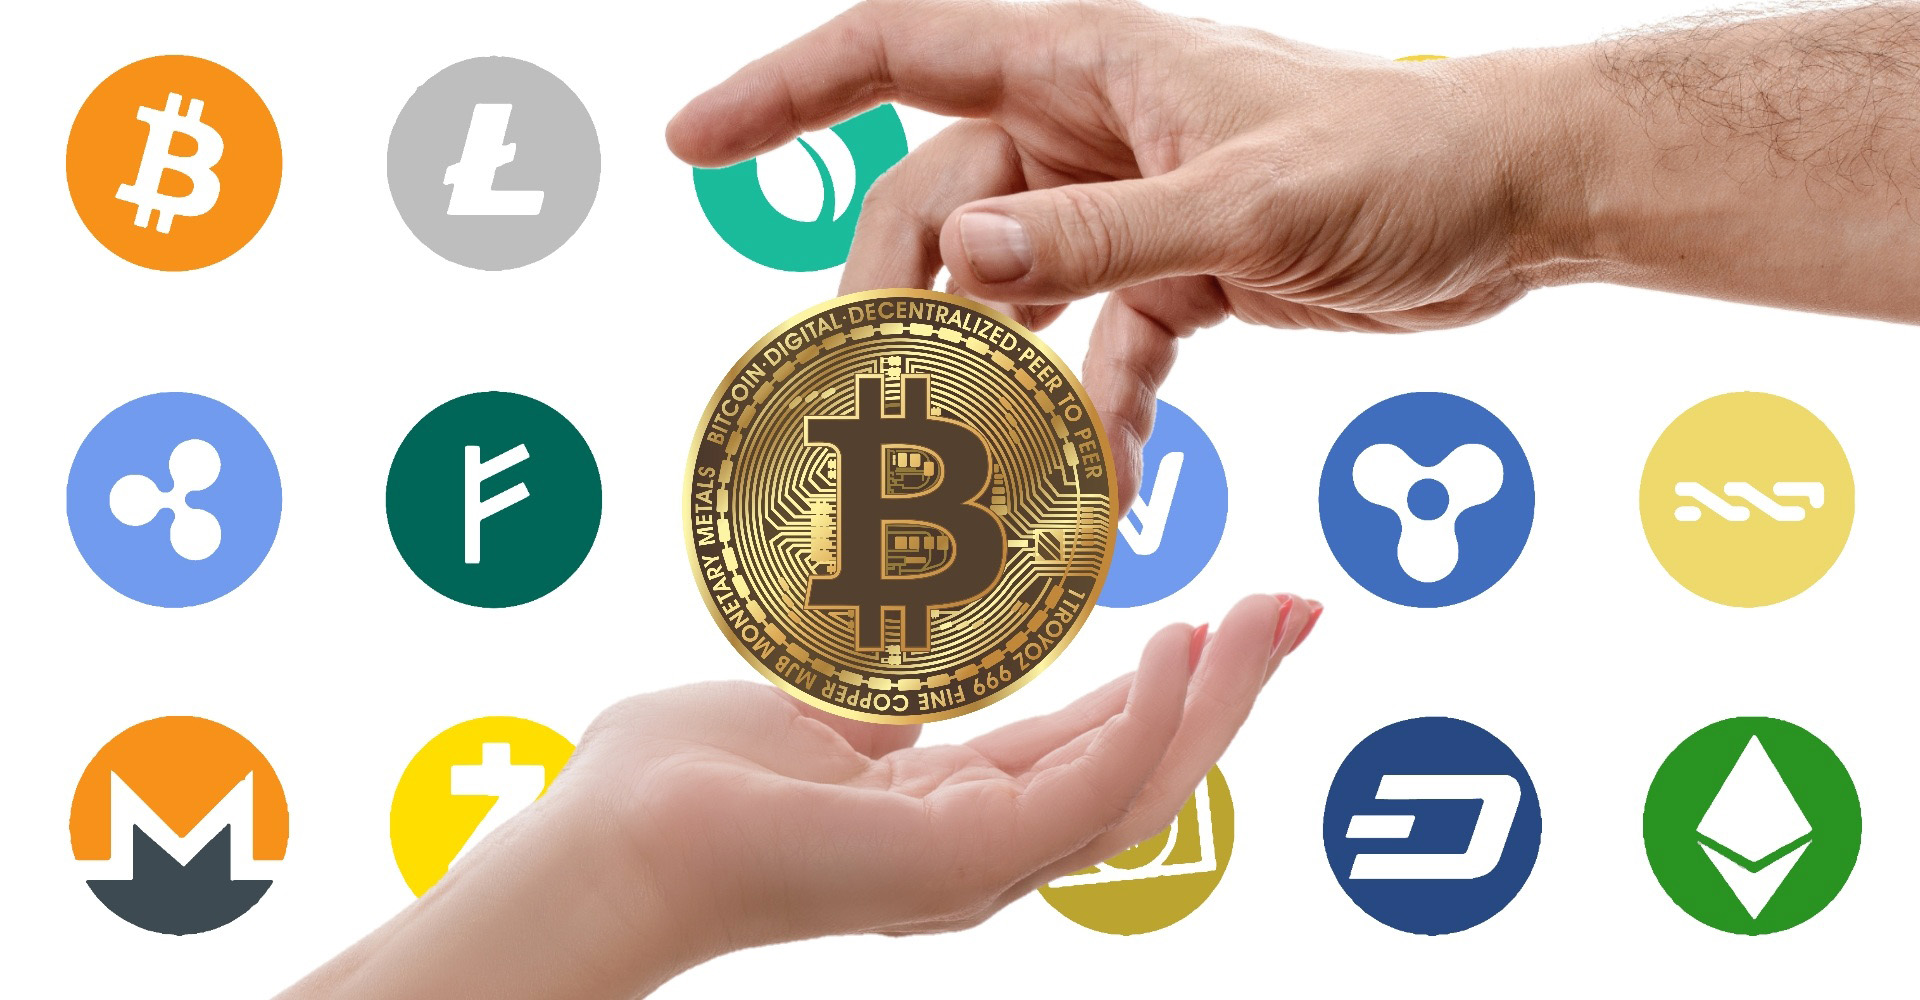 Bitcoin and other cryptocurrency exchange image - Free ...